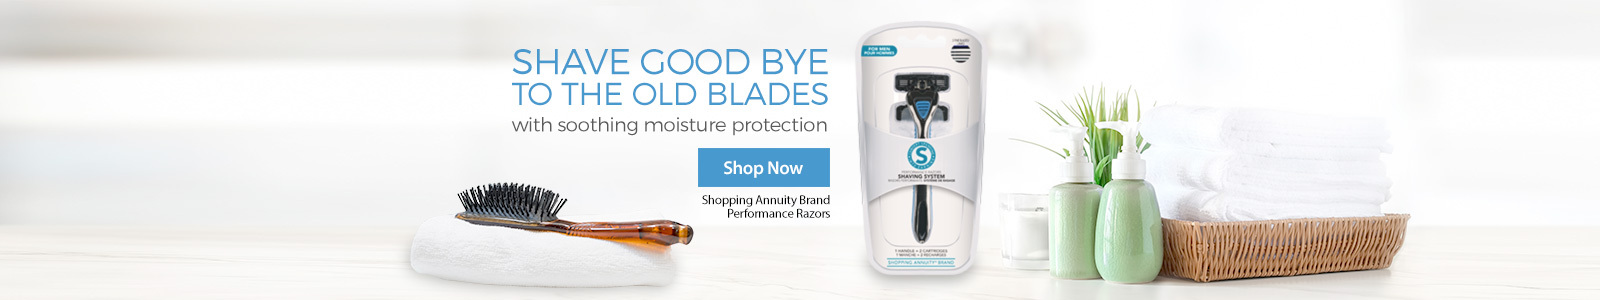 Shave good bye to the old blades with soothing moisture protection Shop now, shopping annuity brand perfromance razors